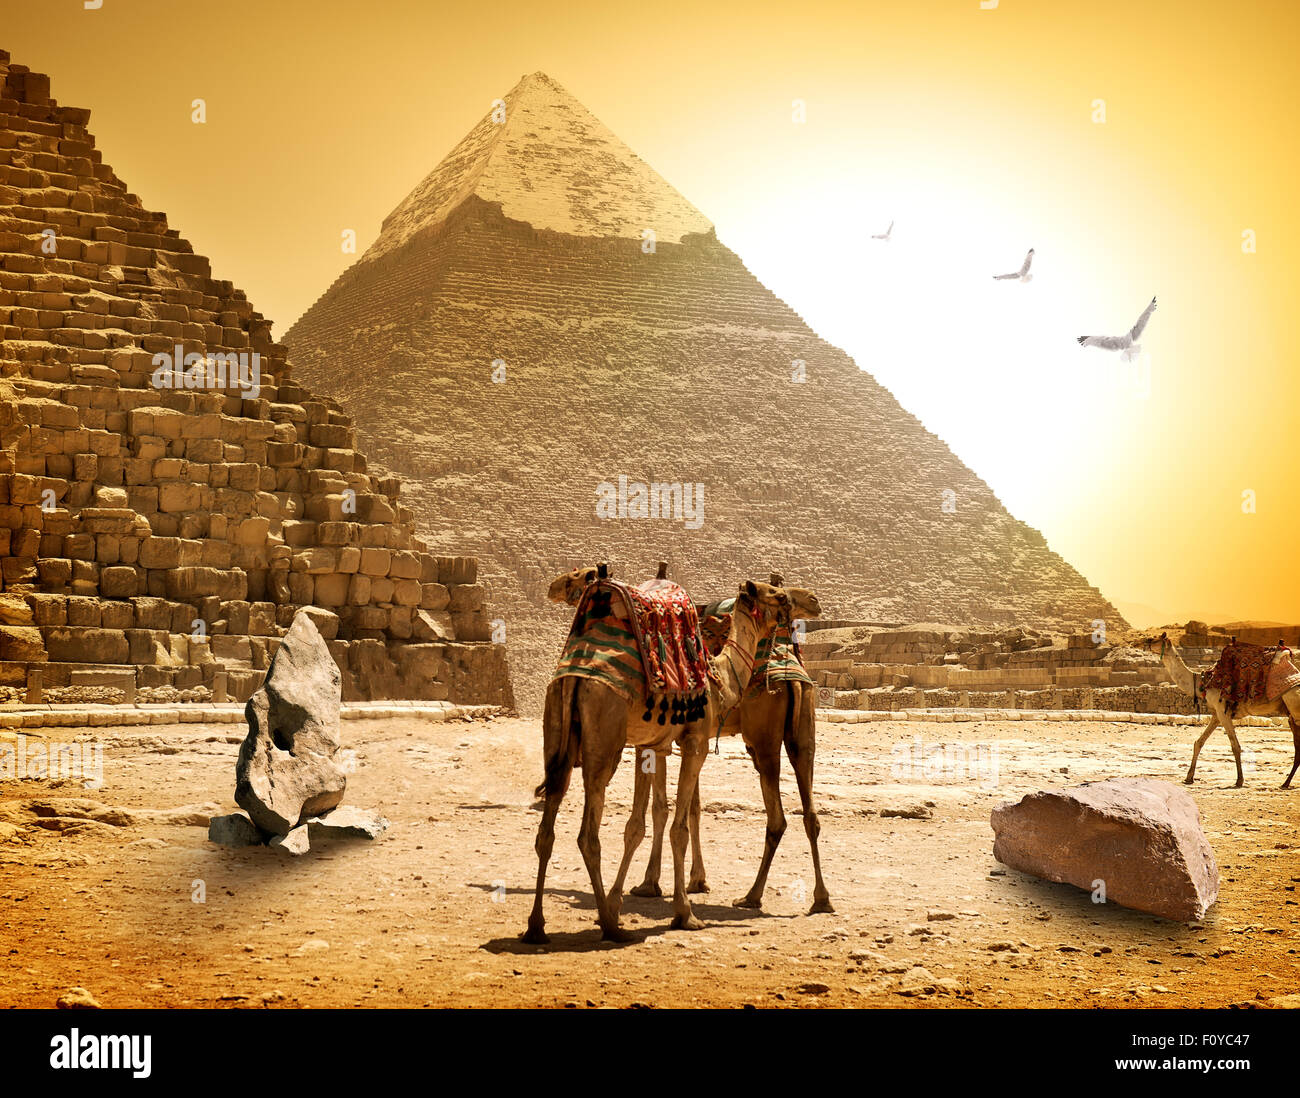 Camels and pyramids at the hot sunny evening Stock Photo